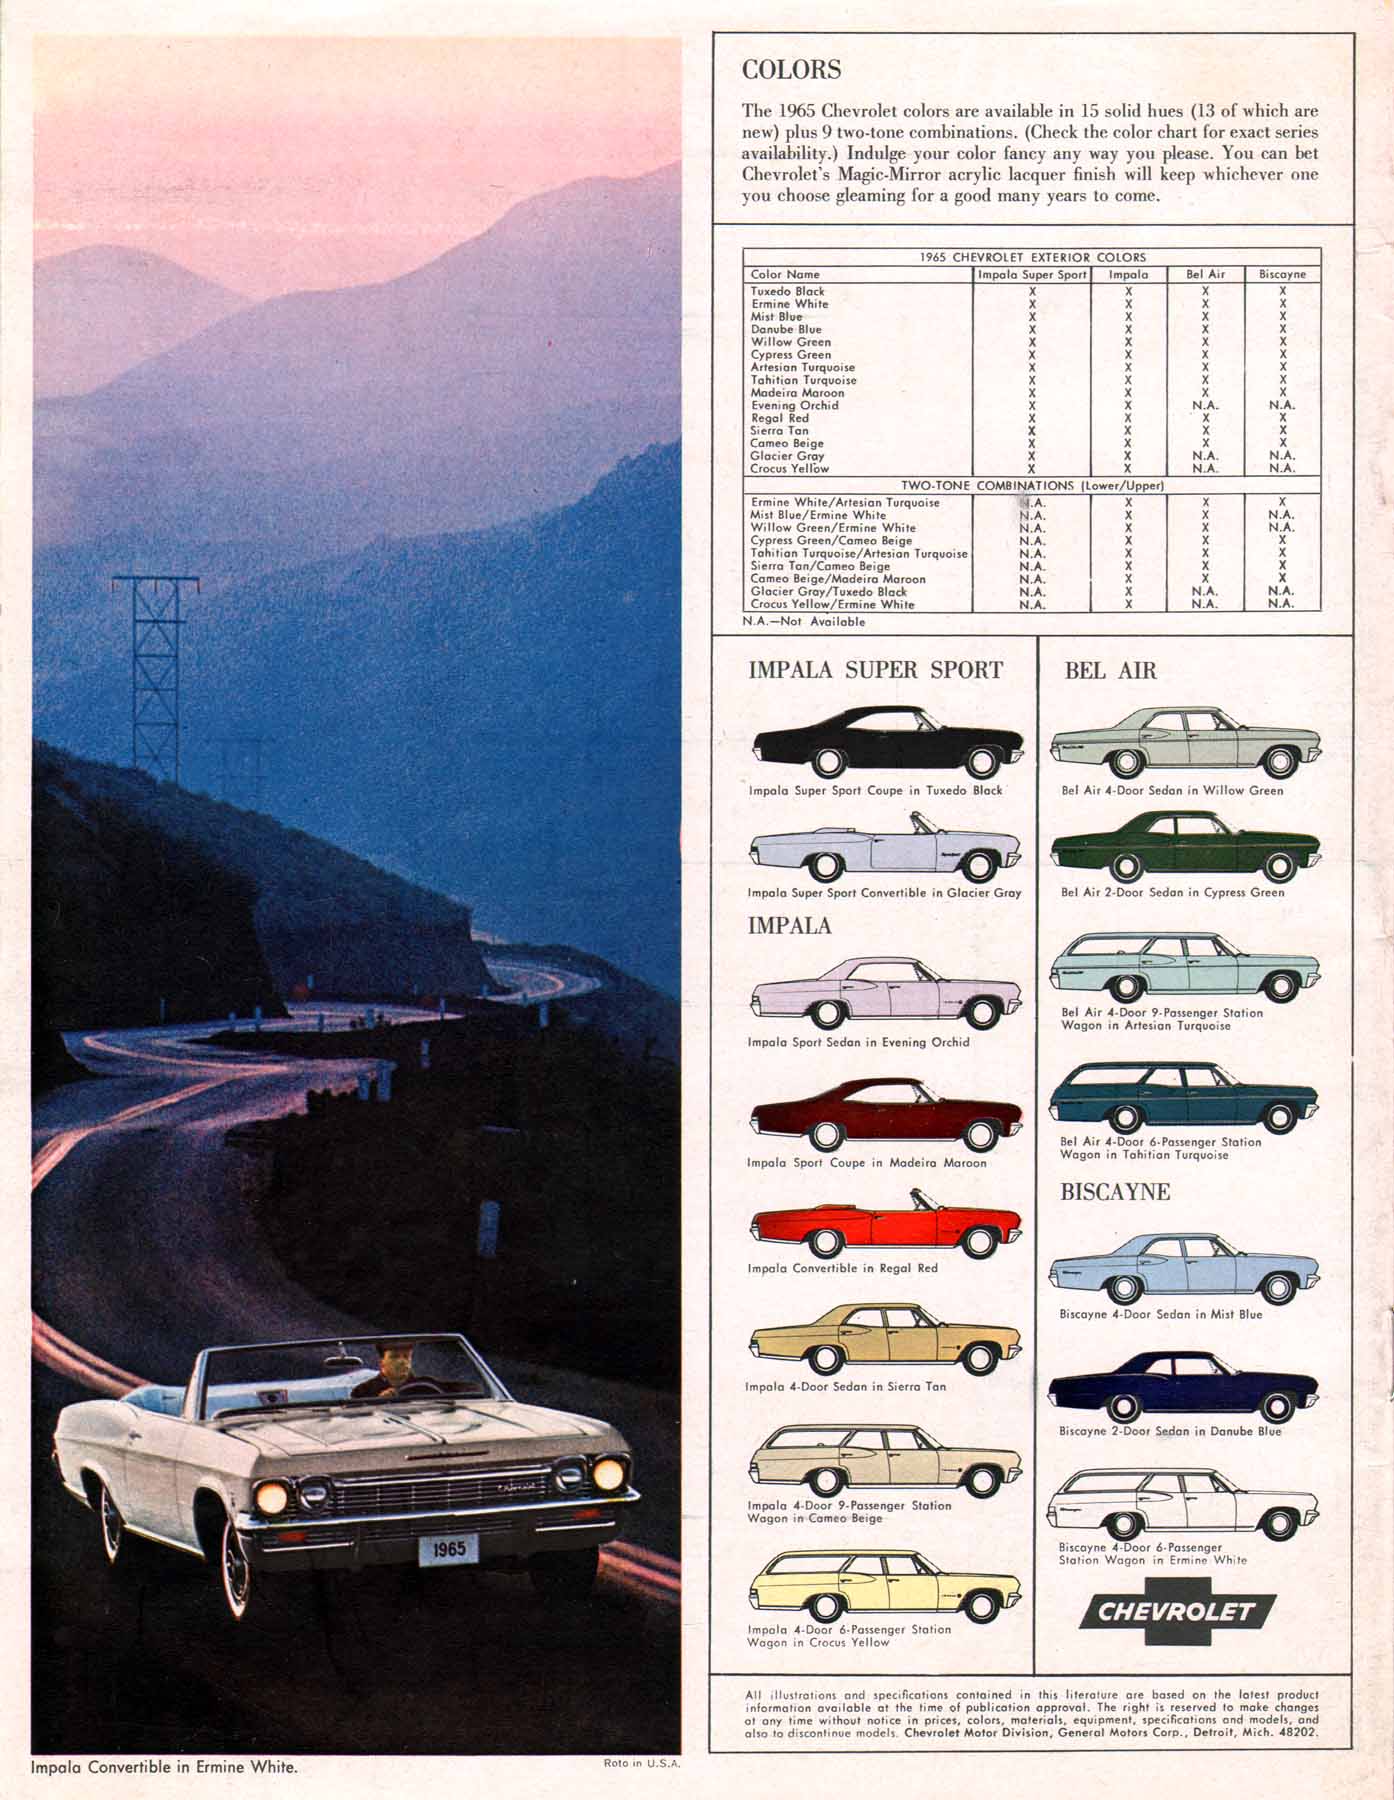 1965 Chevrolet Full-Size Brochure Page 1